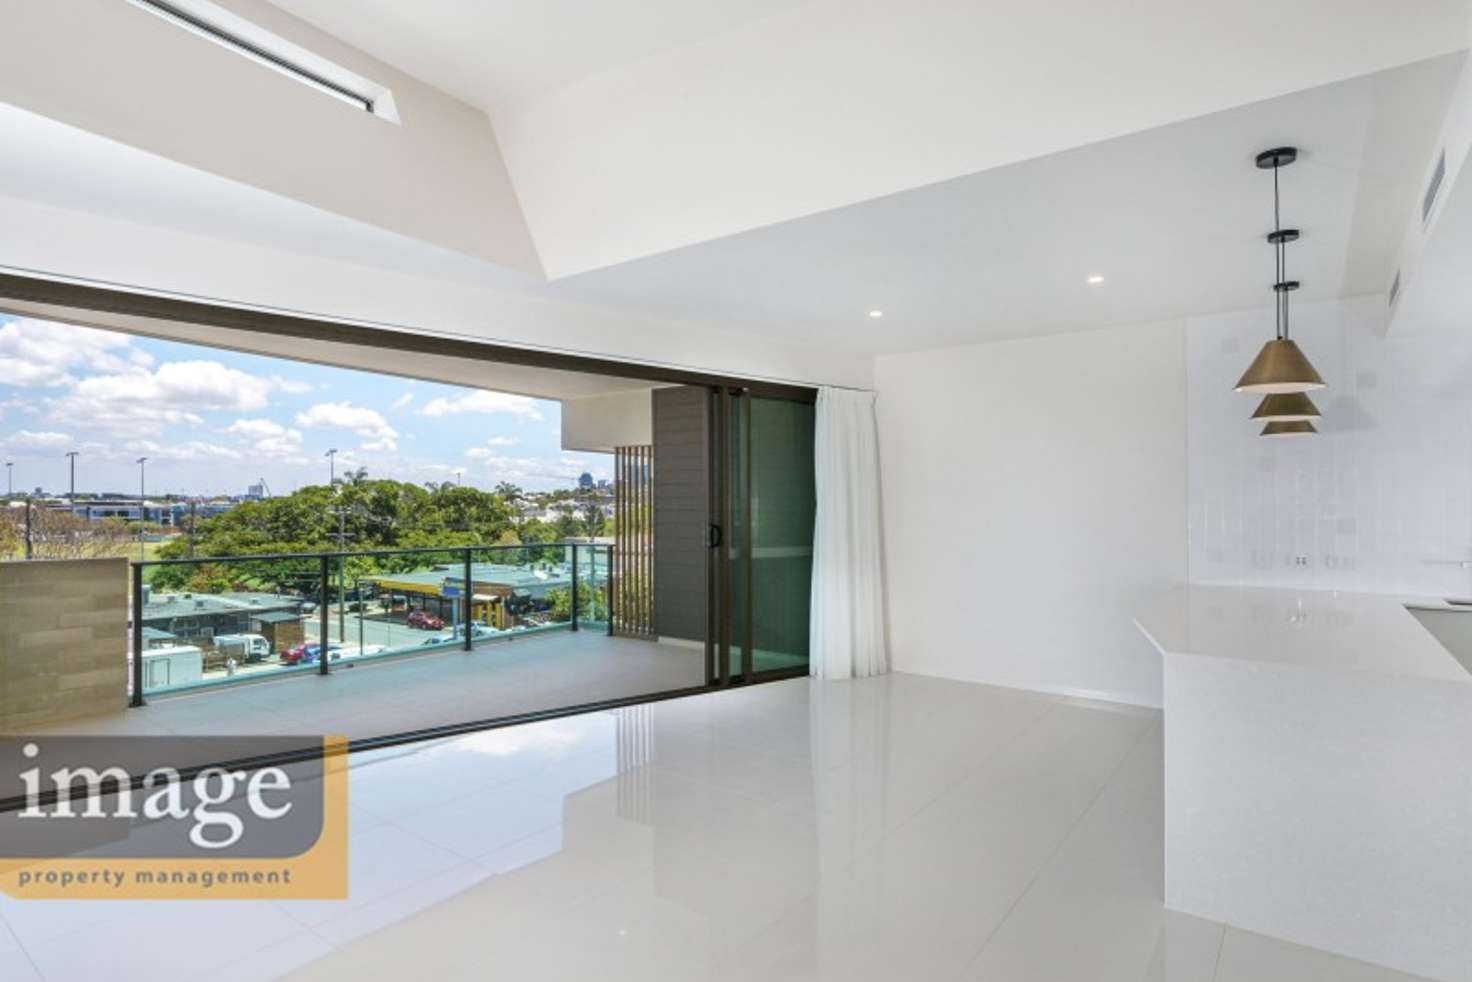 Main view of Homely unit listing, 3/19 Princess street, Bulimba QLD 4171